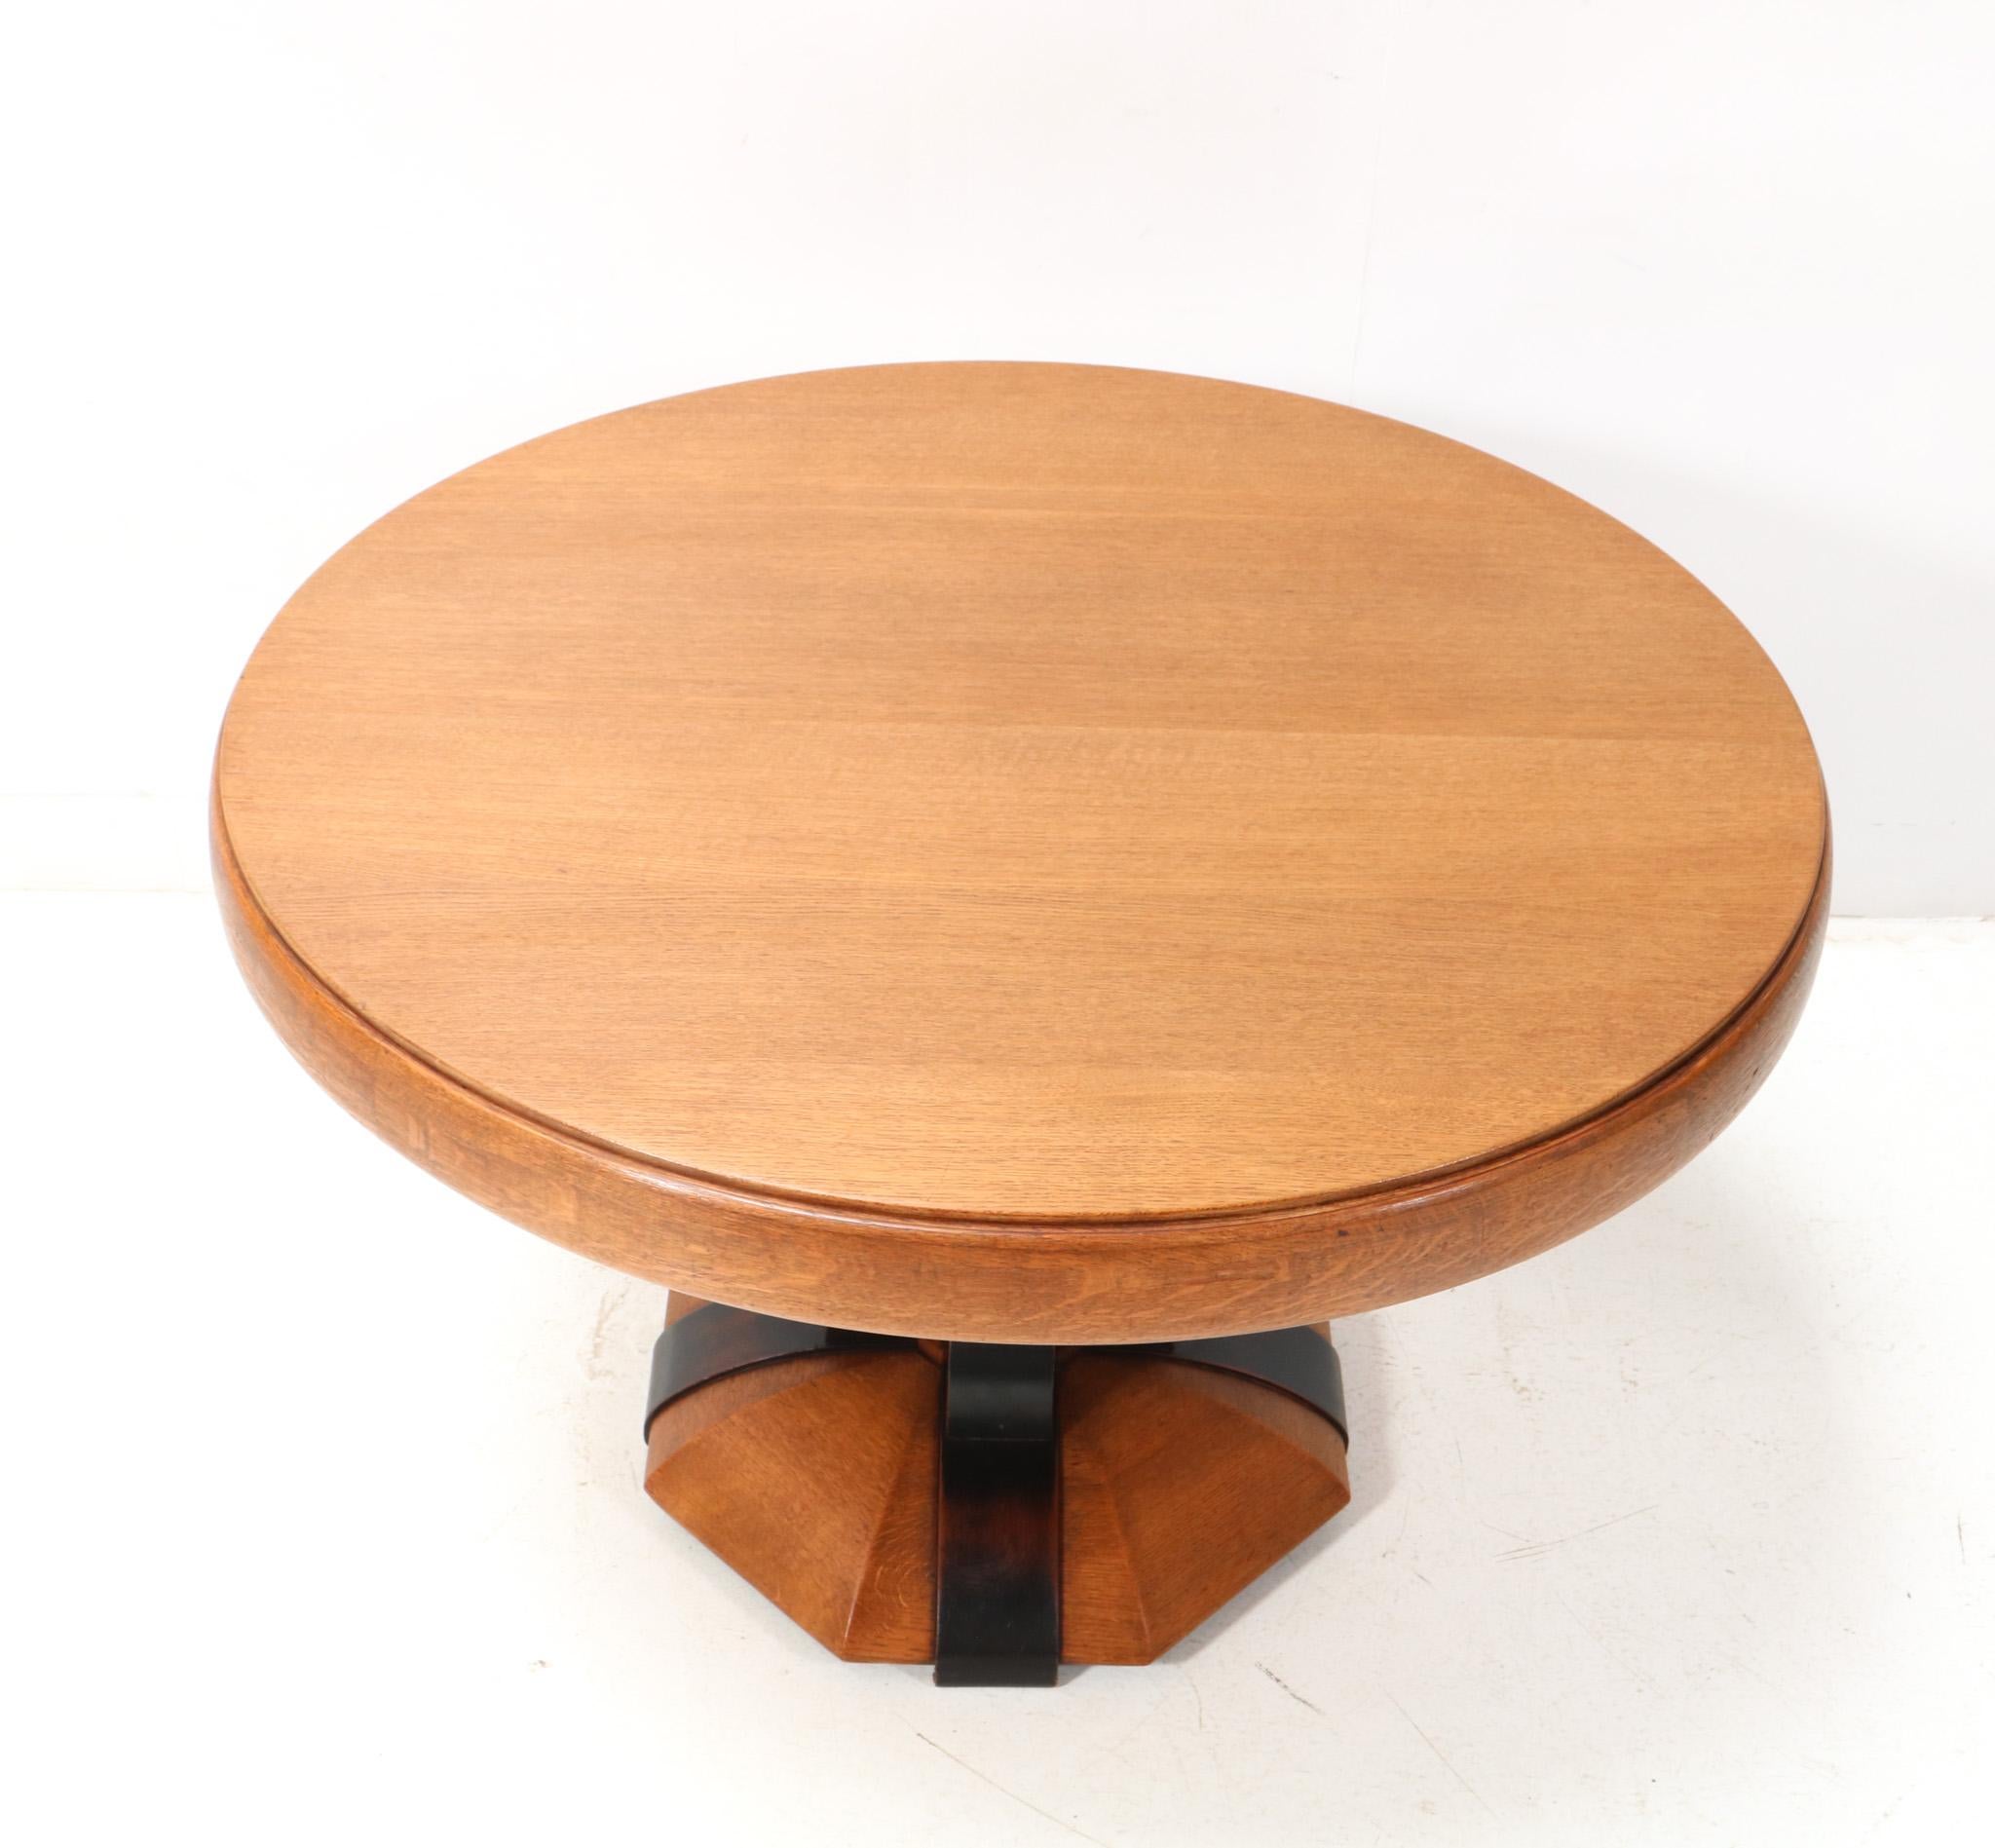 Early 20th Century  Art Deco Amsterdamse School Oak Dining Room Table by Paul Bromberg for Pander For Sale